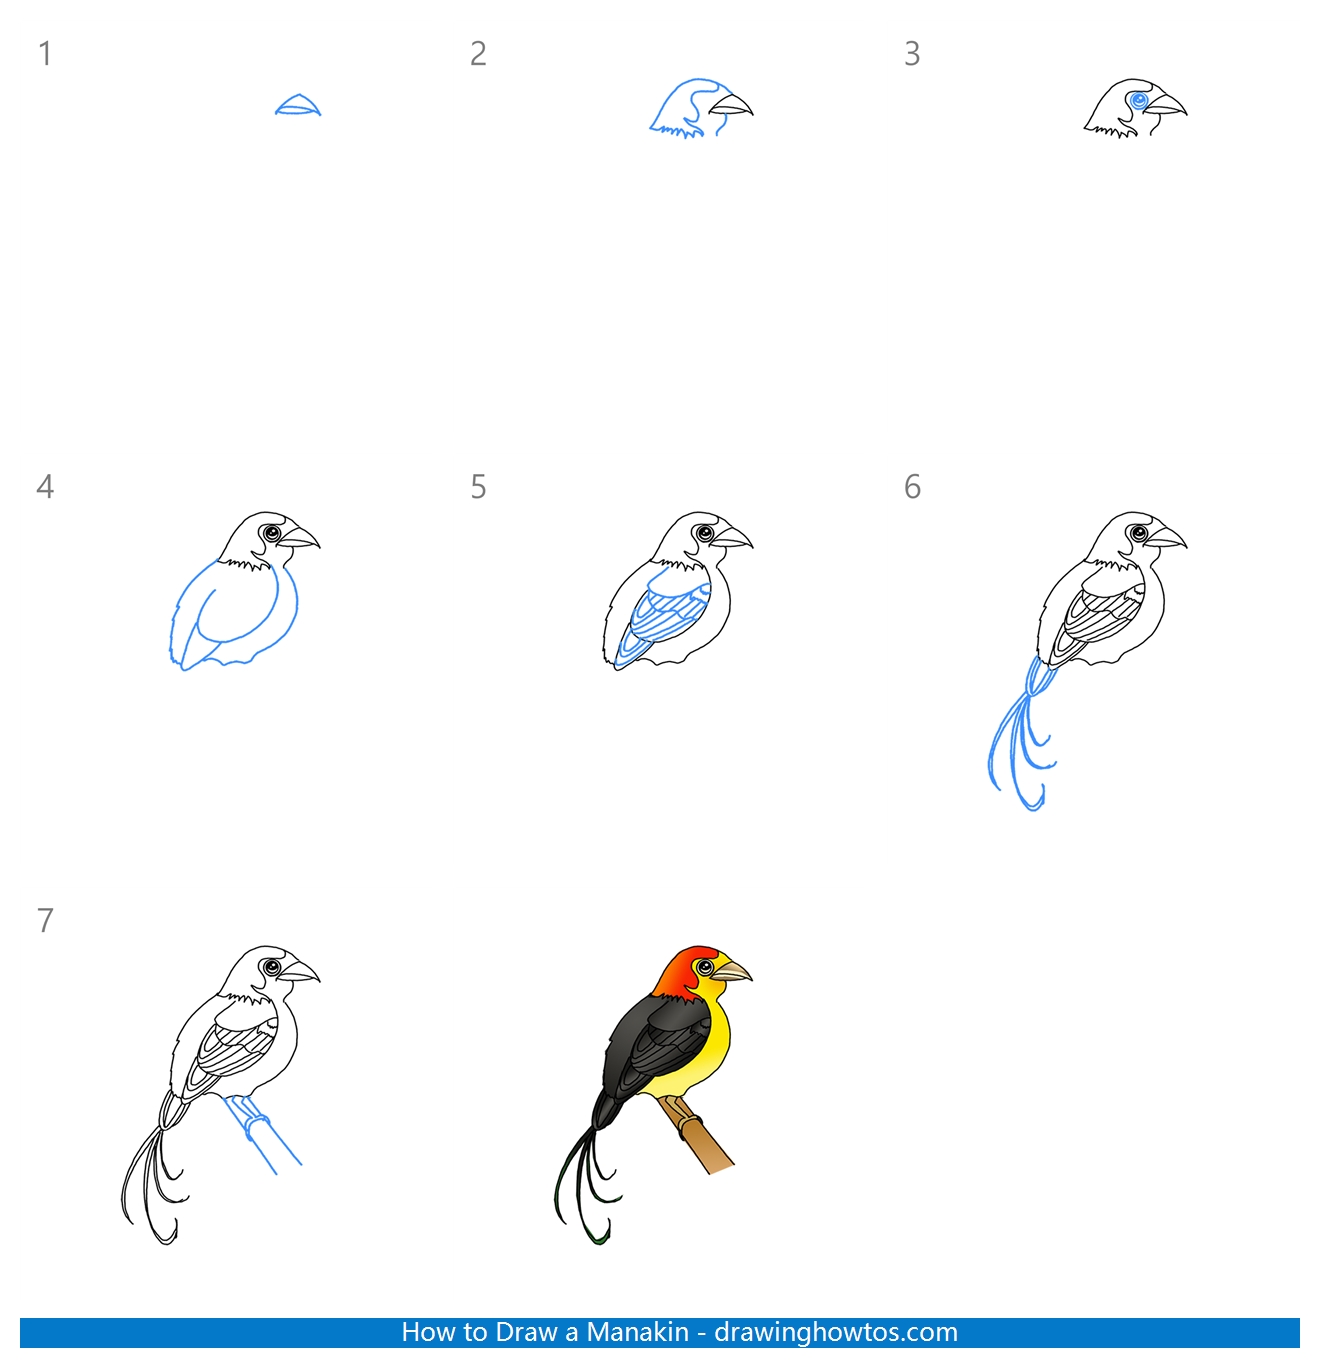 How to Draw a Manakin Step by Step